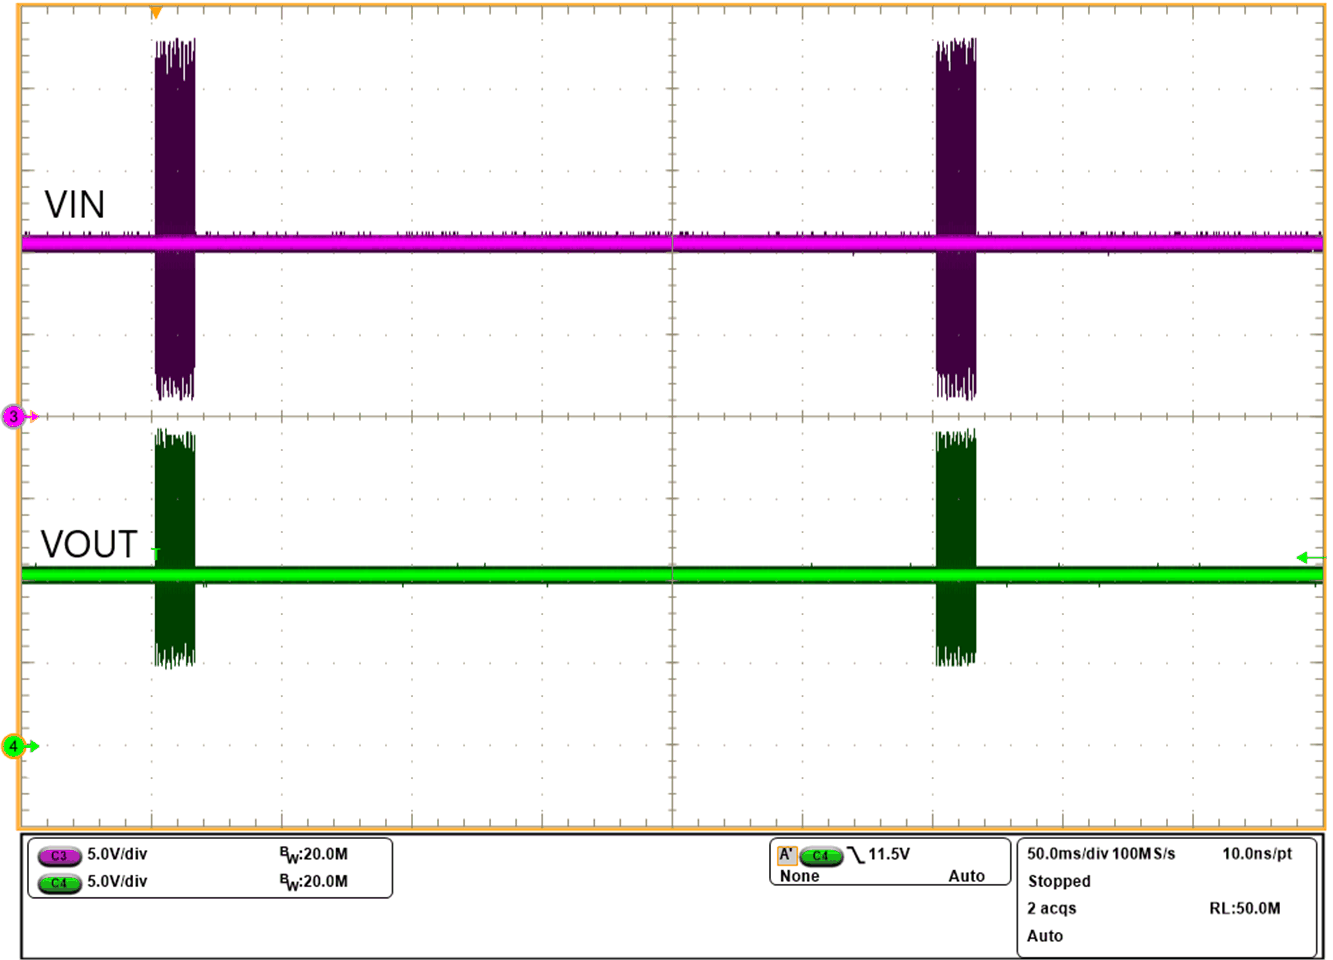 TPS2596 Typical-waveform-page-1.gif